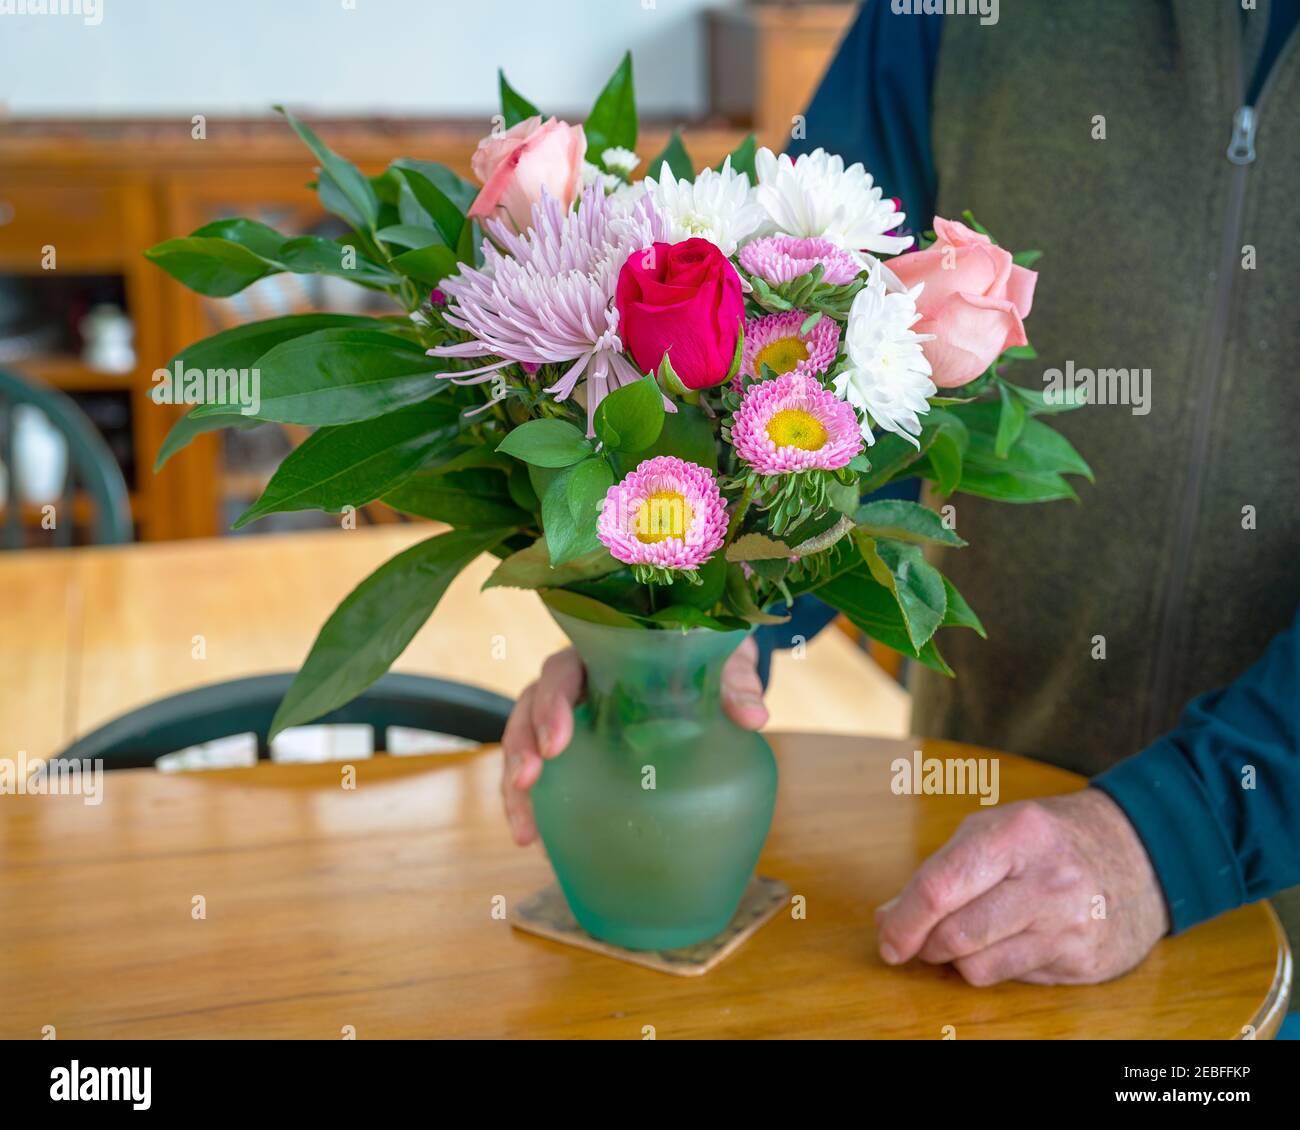 A bouquet of mixed flowers in a glass vase. Stock Photo